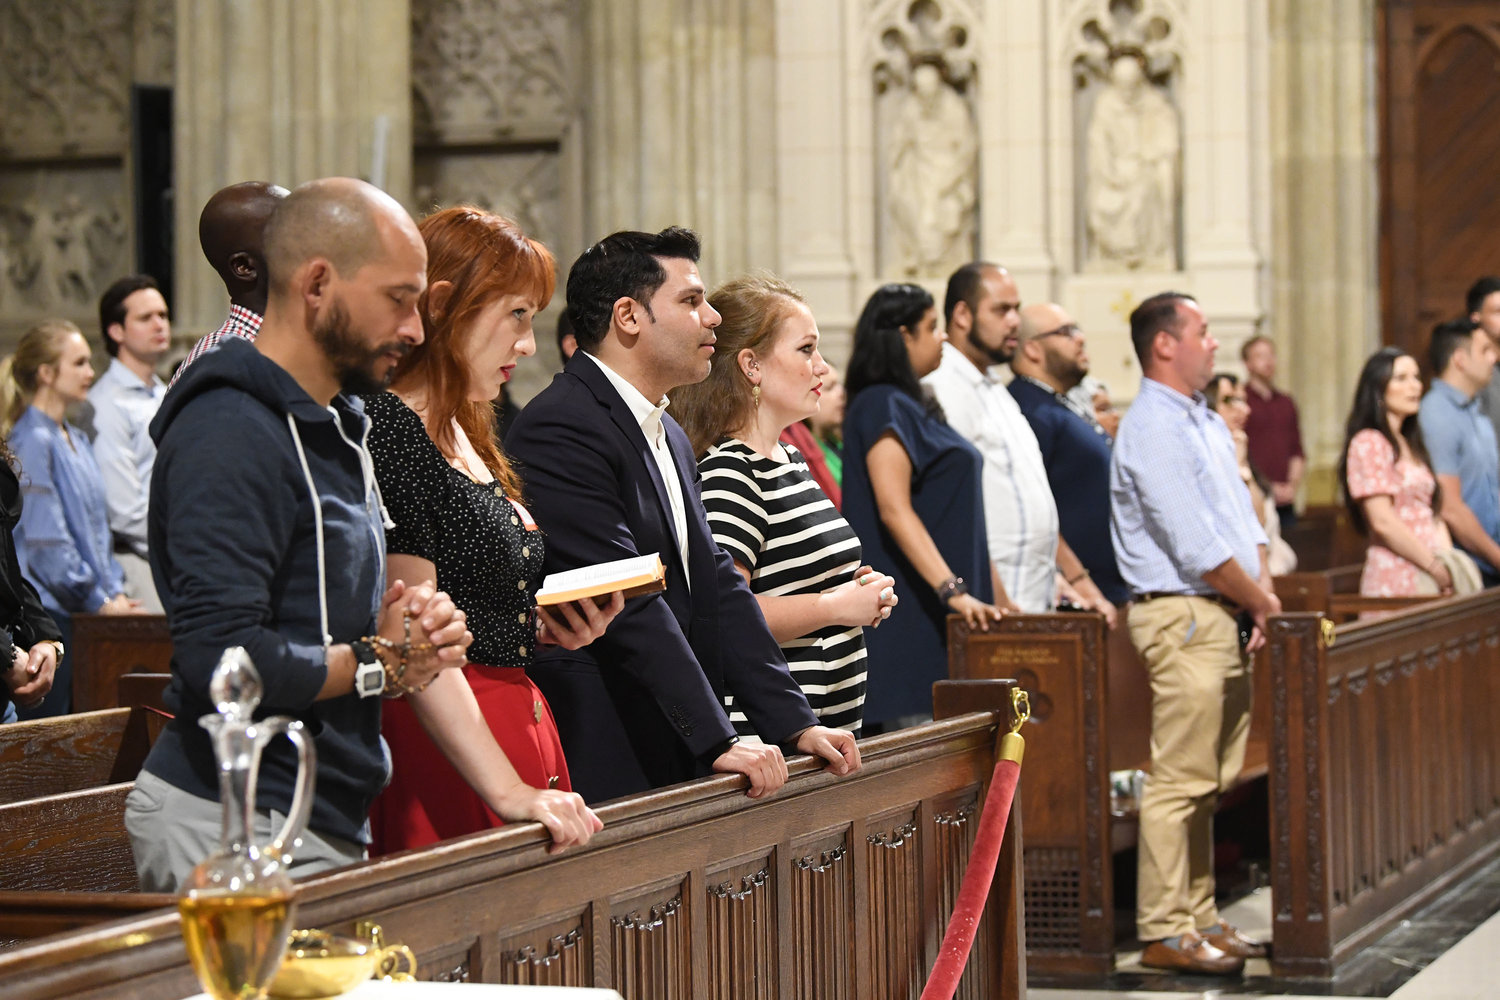 Young adults pray during the evening liturgy.